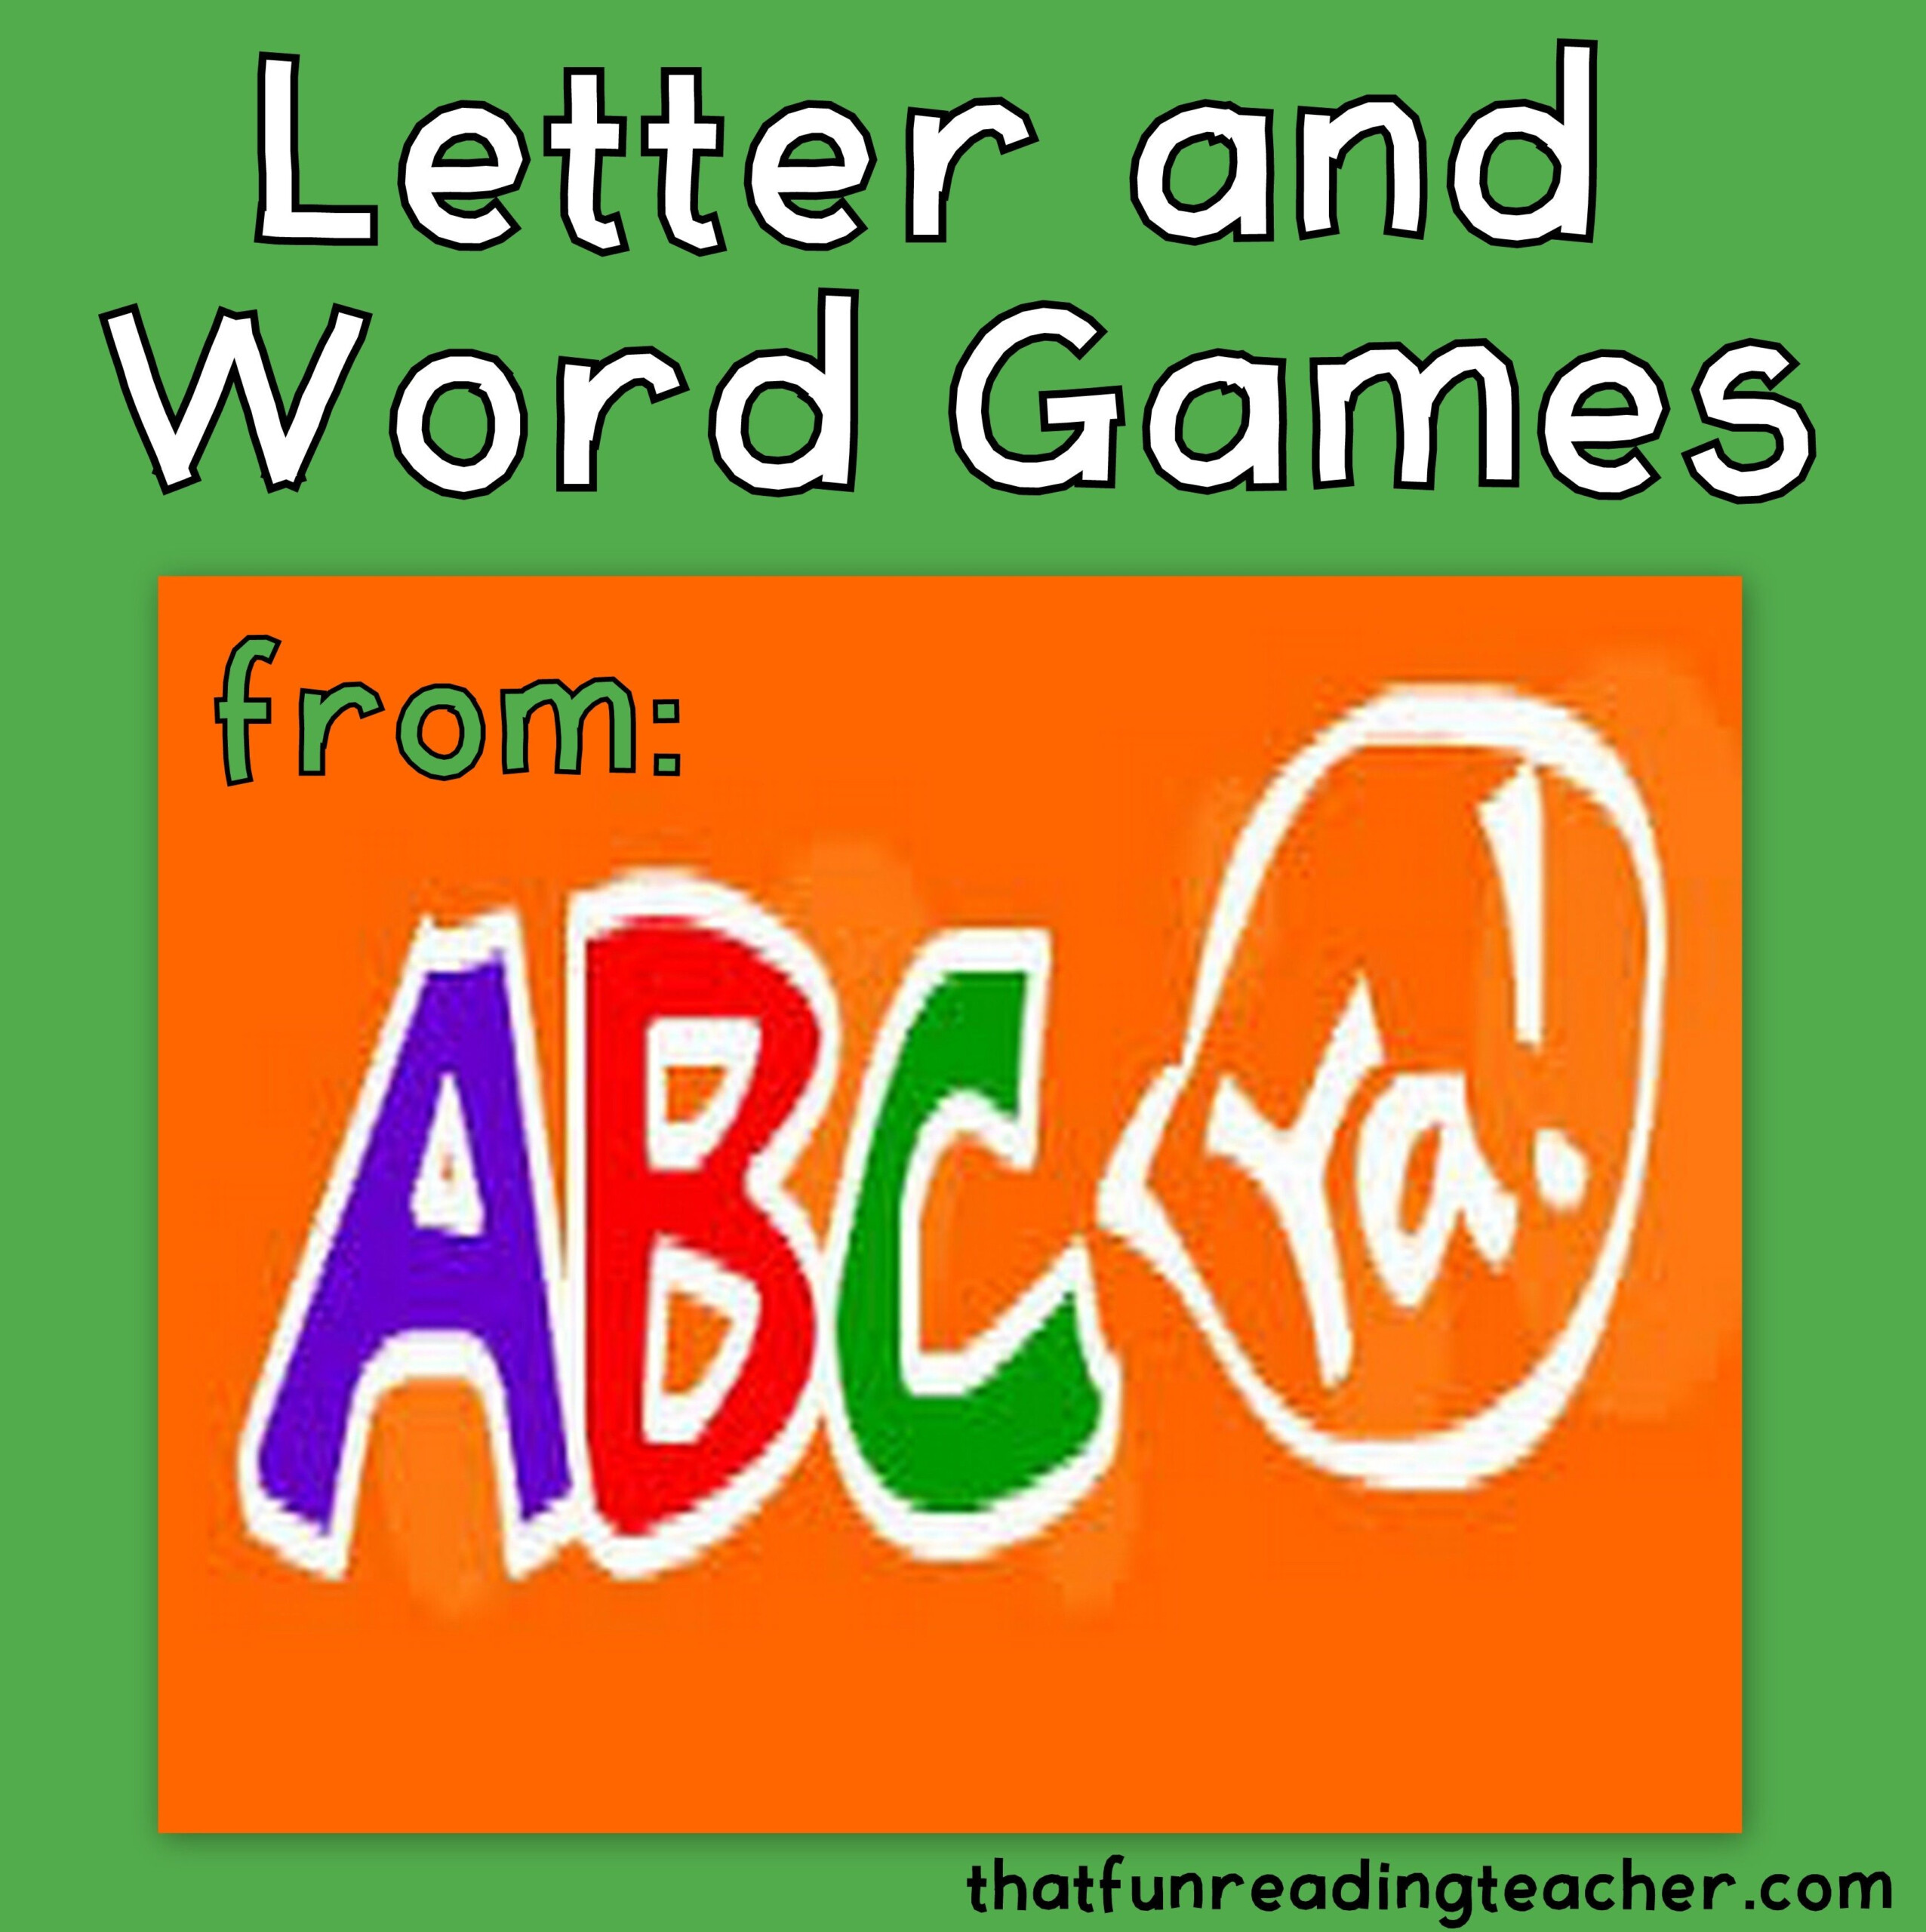 Letter And Word Games From Abcya | Intro. For intended for Abcya Tracing Letters